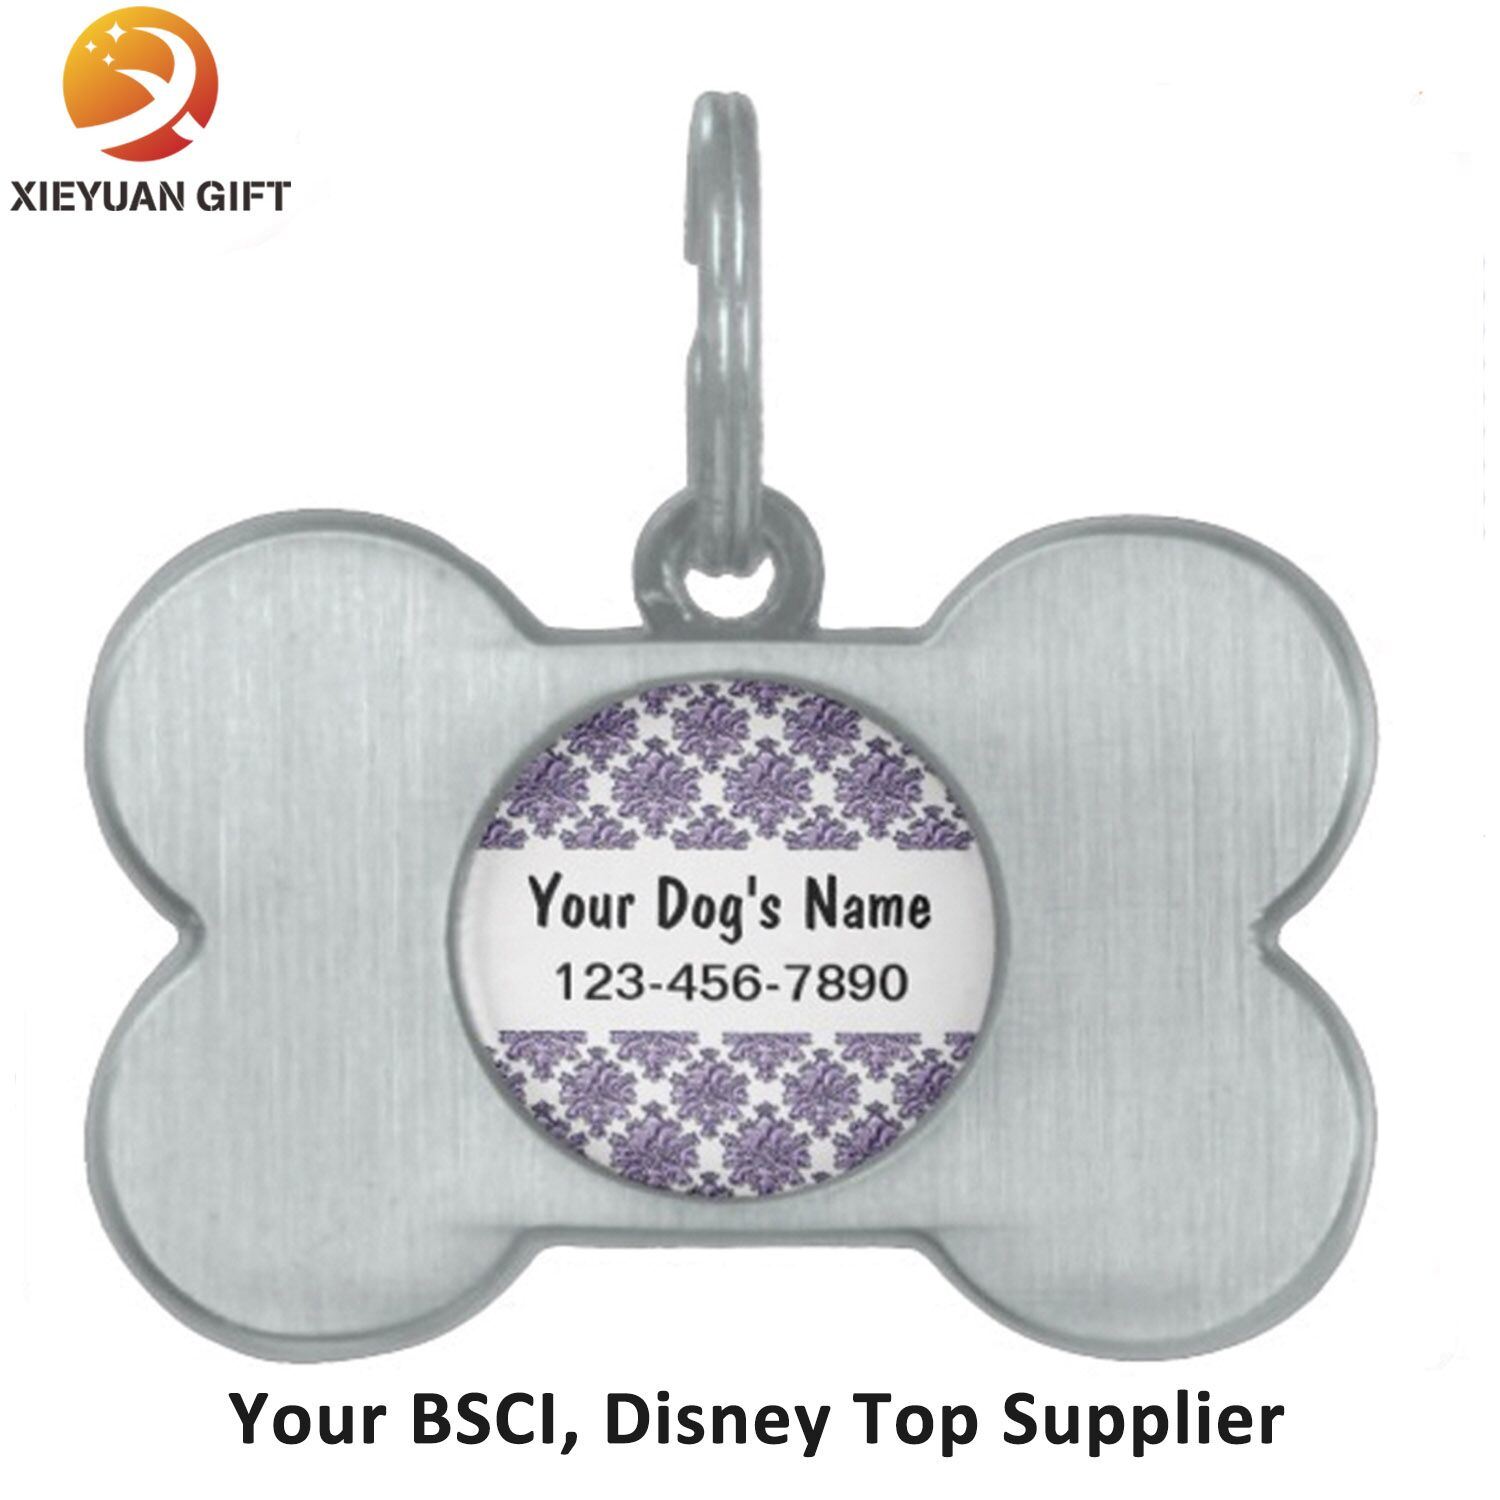 Black Pets The Original Dog ID Tag with Medium Personalized